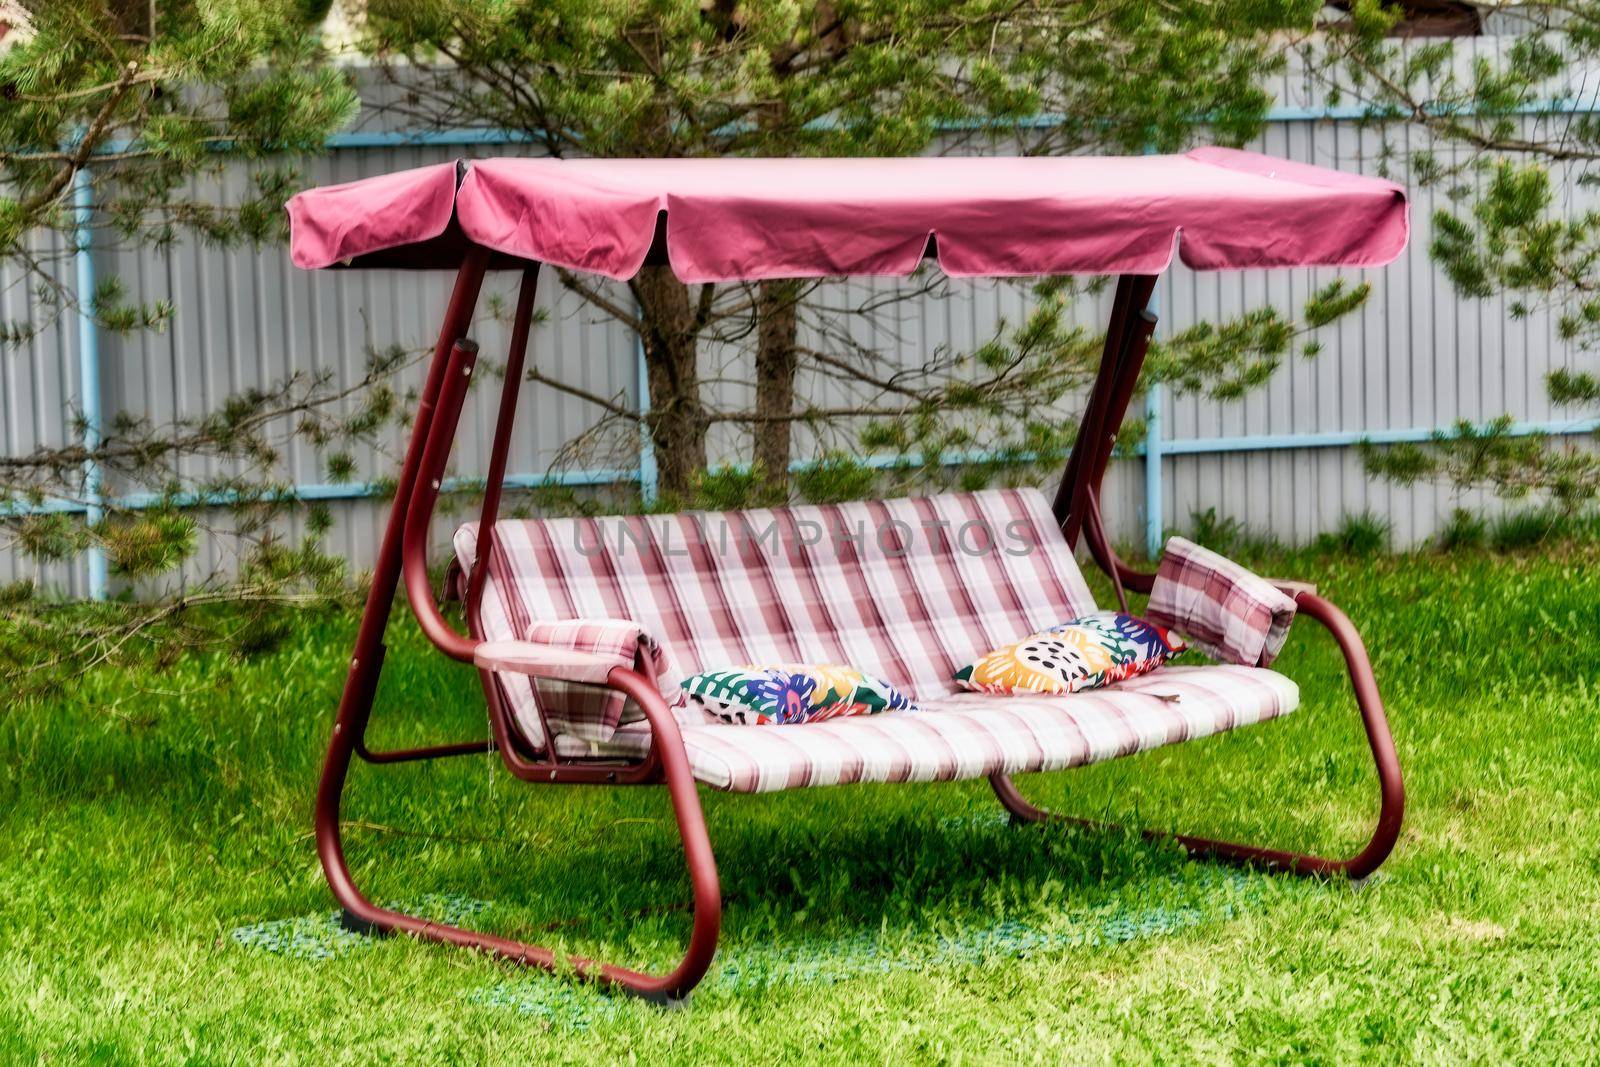 Swing bench with a canopy on a green grassy lawn. Relax in the garden